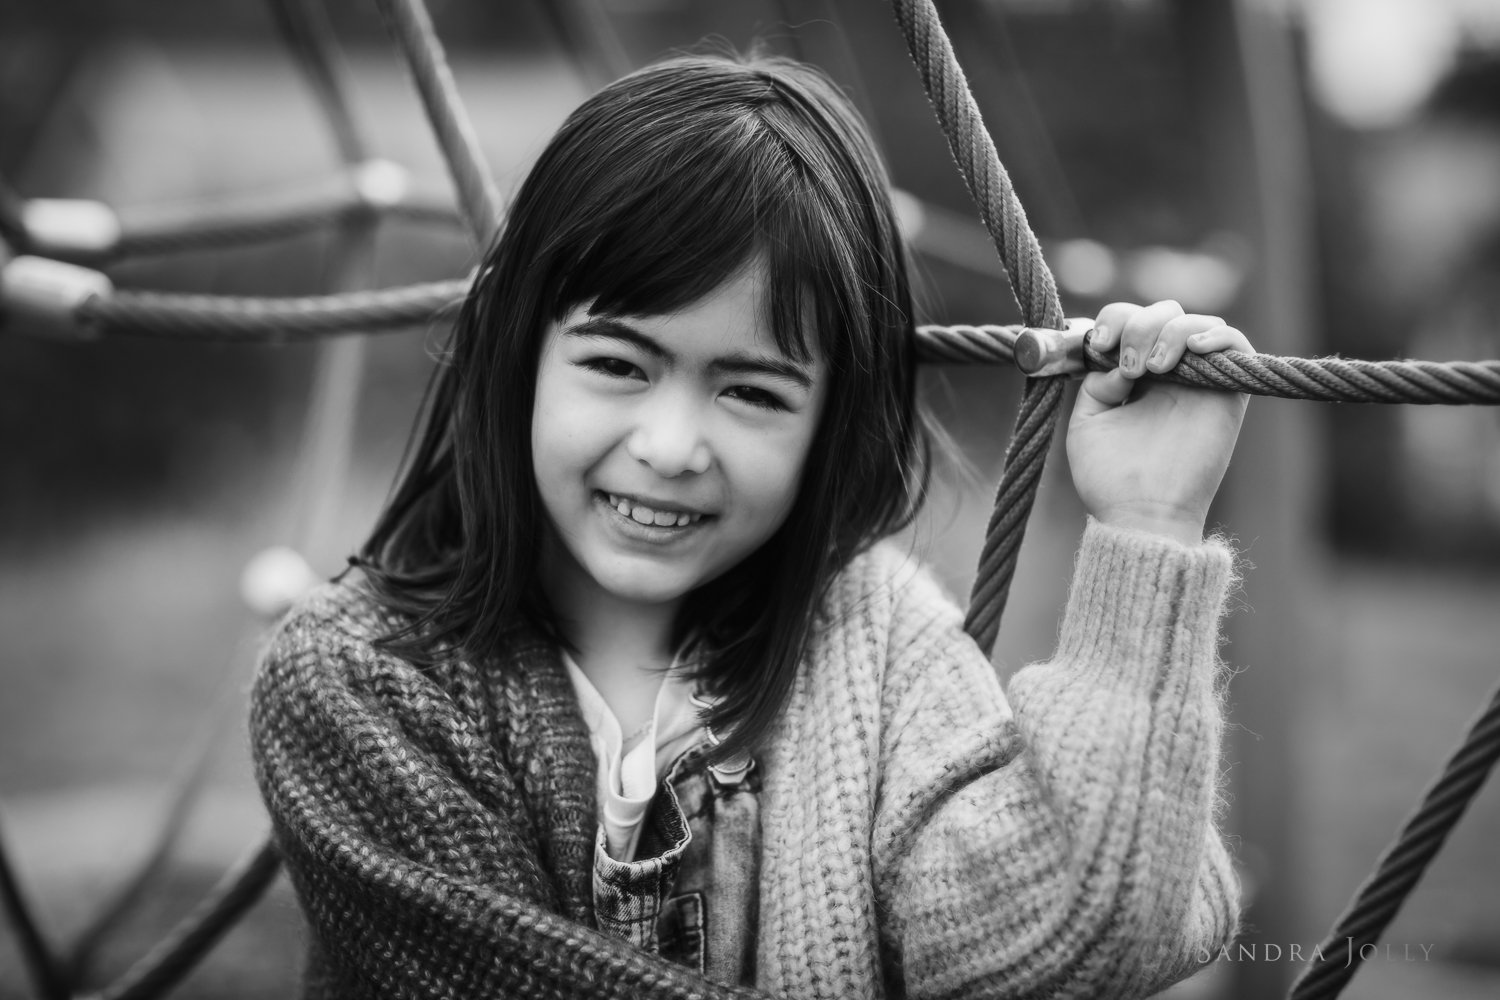 portrait-of-girl-in-playground-by-sandra-jolly-photography.jpg